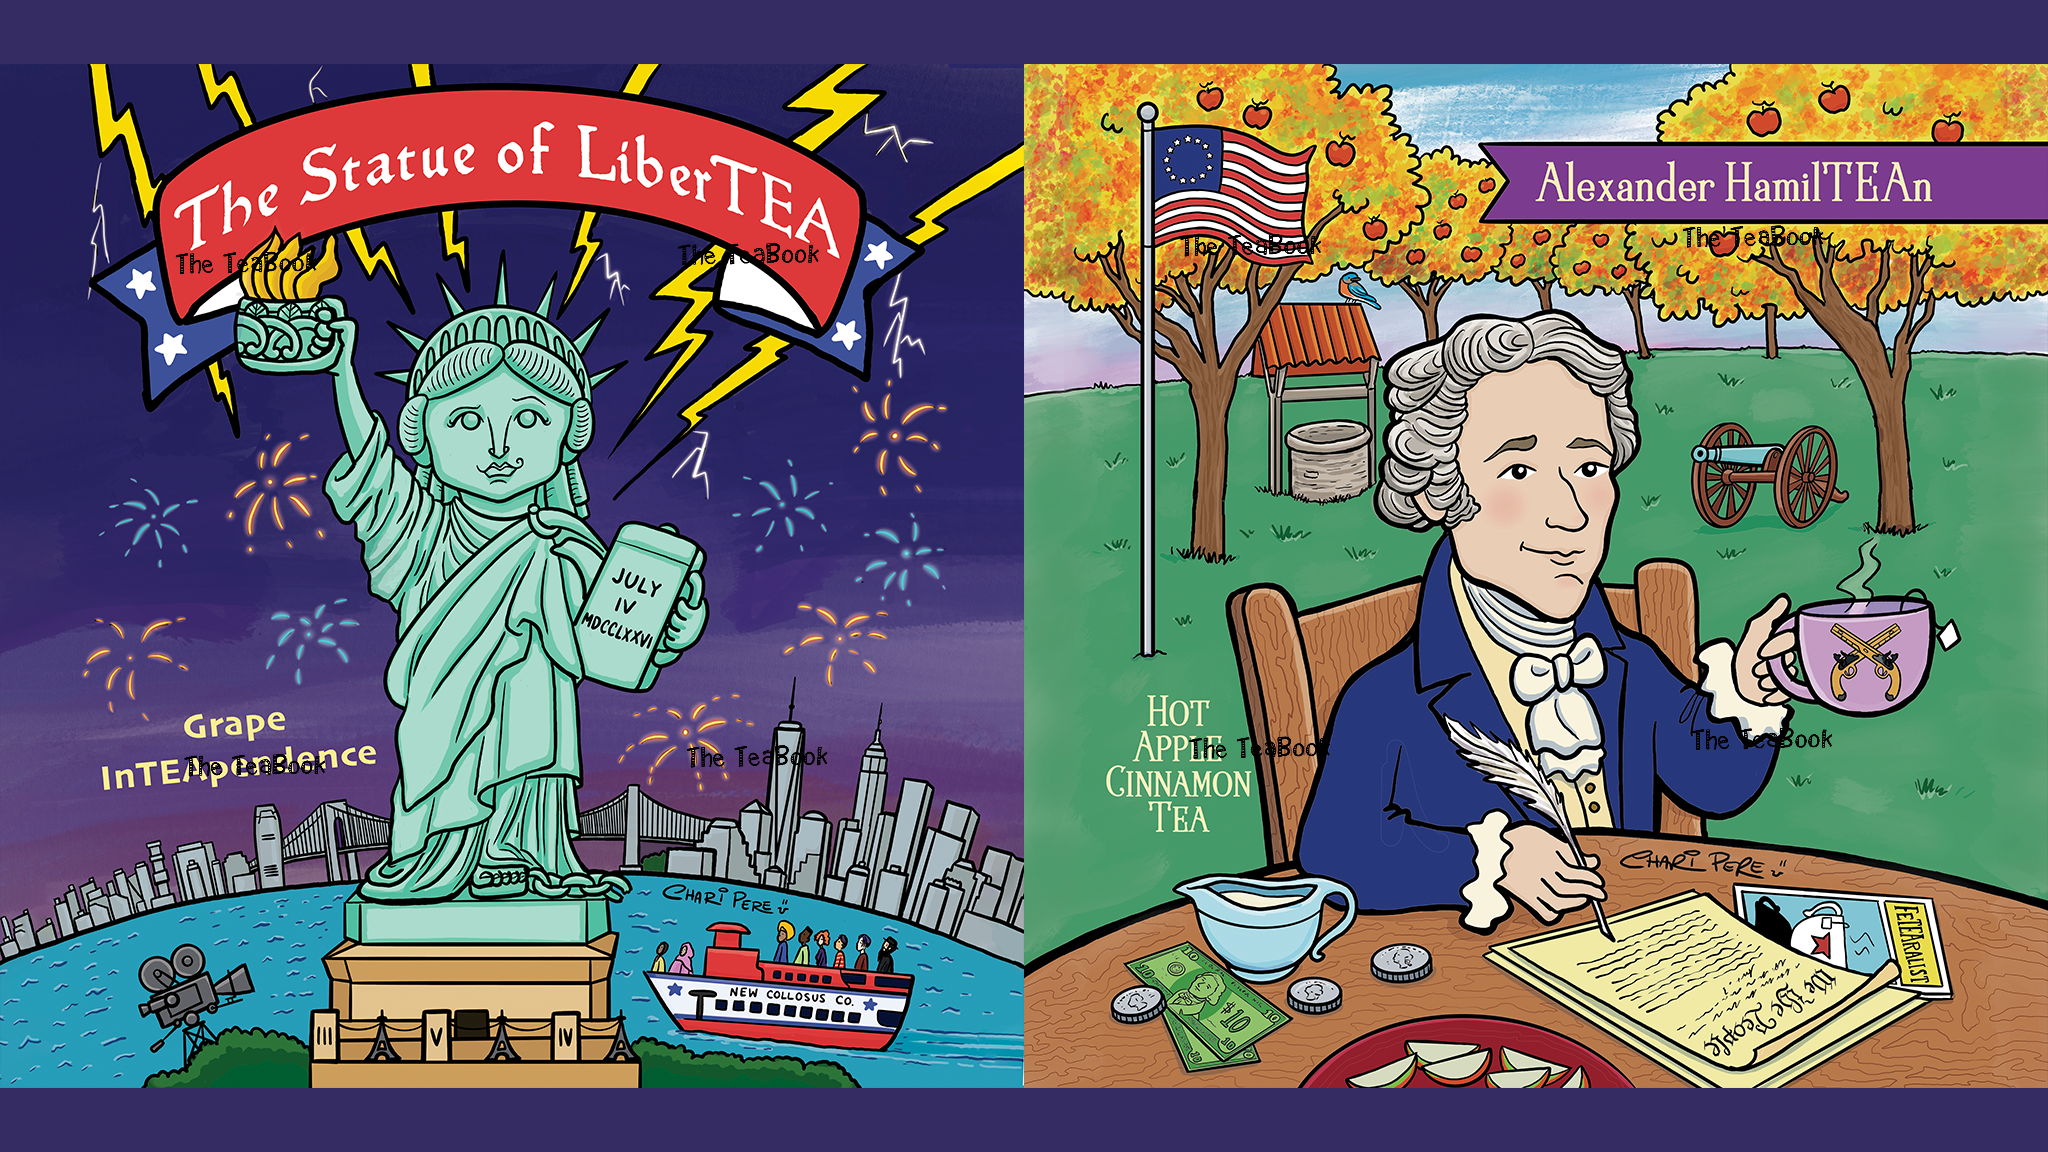 The TeaBook Honors The Statue of Liberty,  America’s First Crowdfunding Campaign, by Walking in Her Footsteps 1217